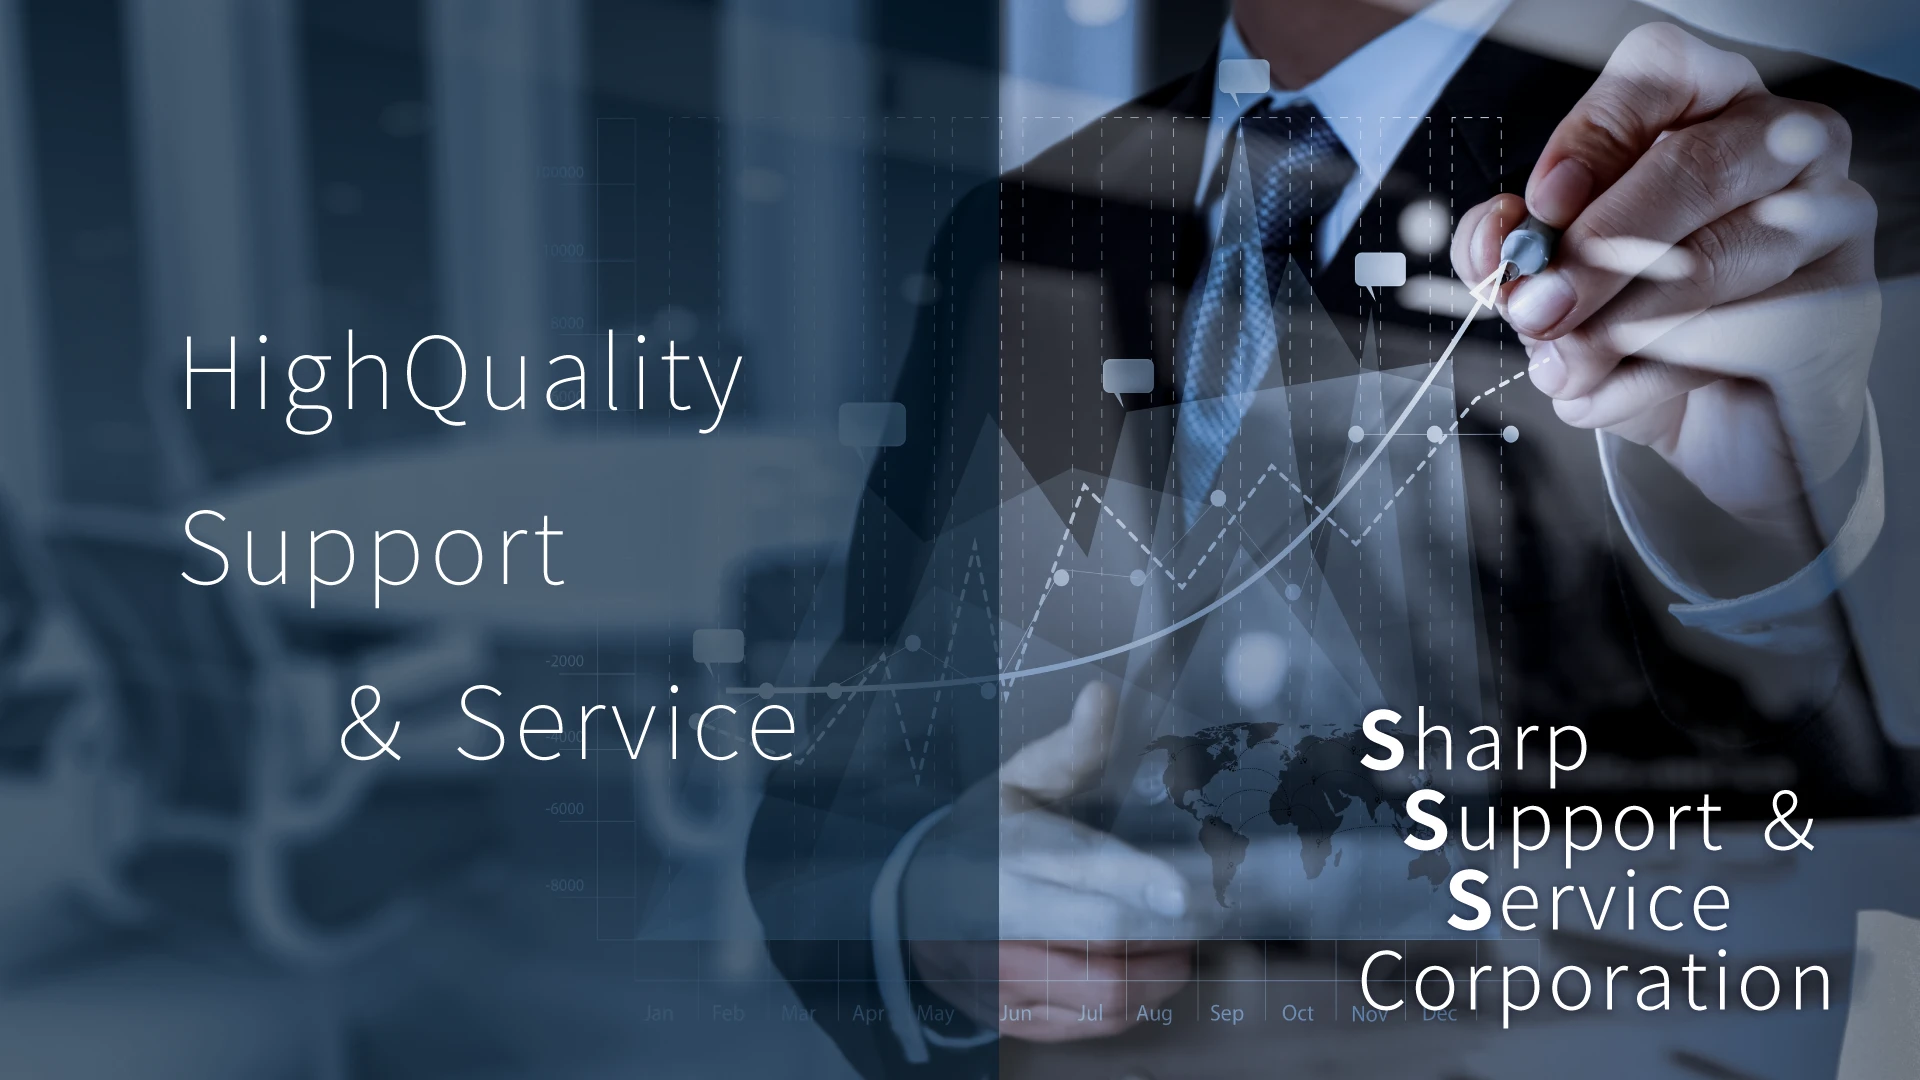 HighQuality Support & Service; Sharp Support & Service Corporation